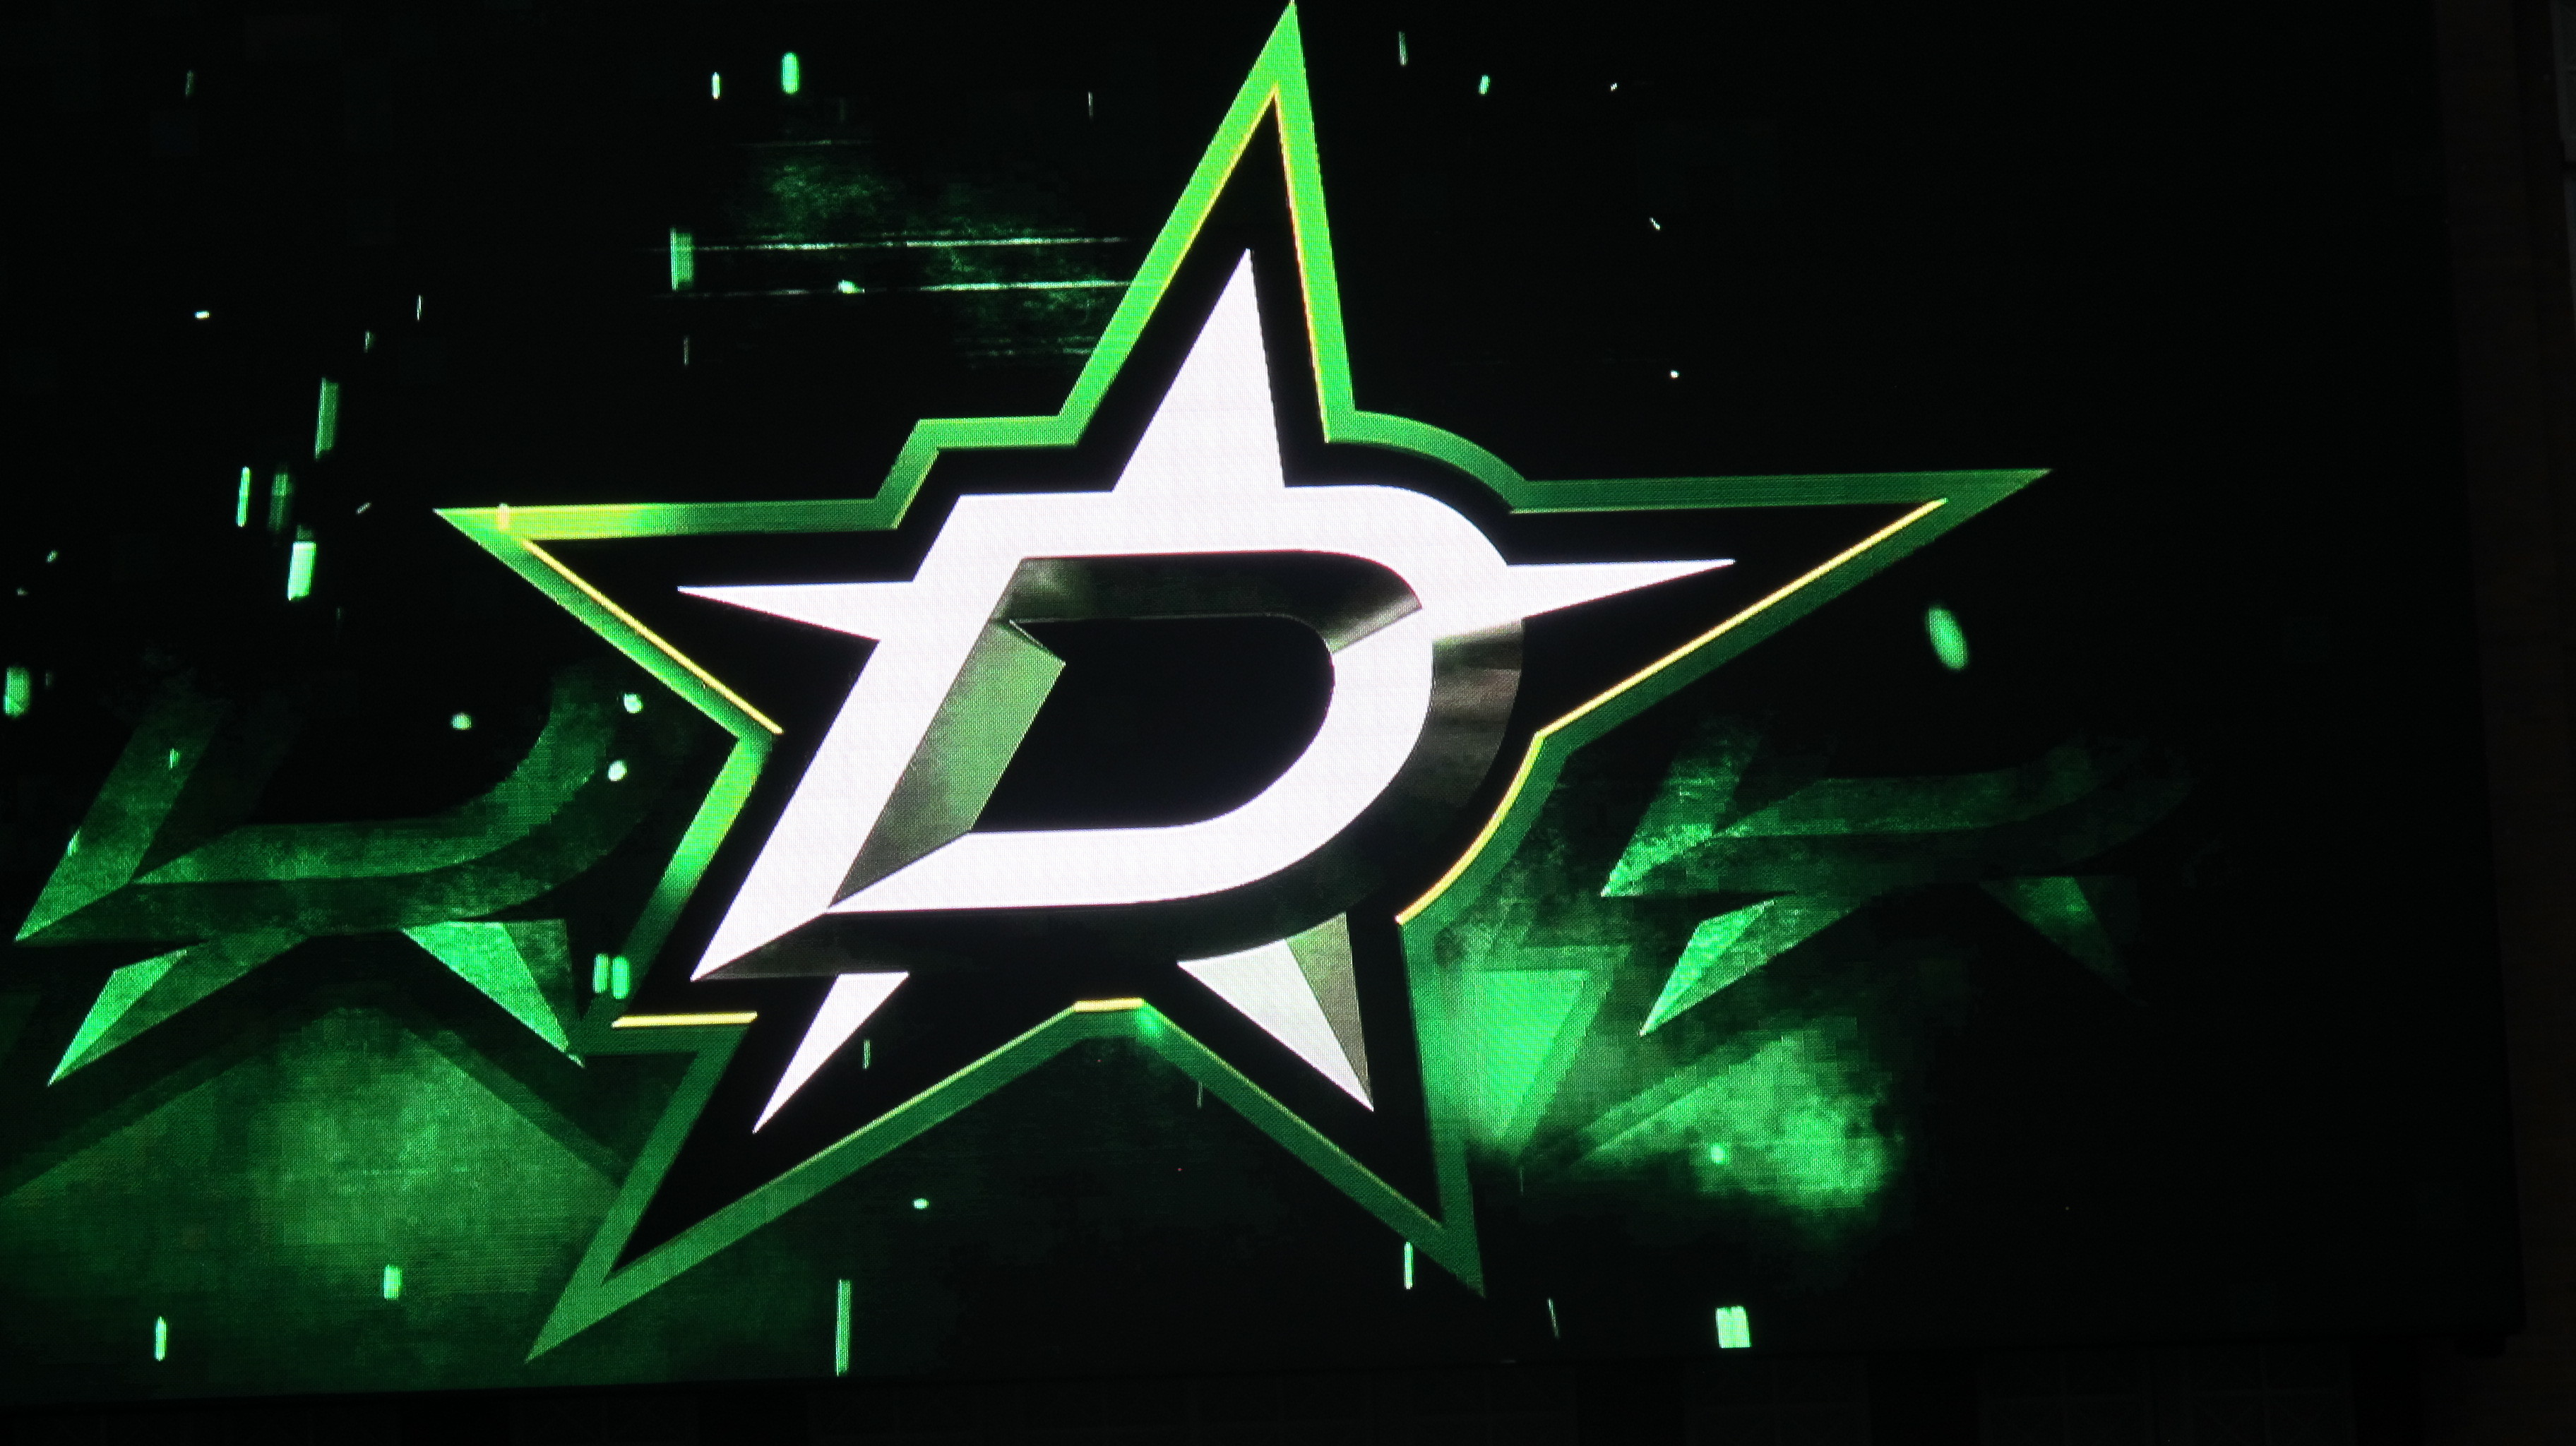 Dallas Stars Background Wallpaper 60 images